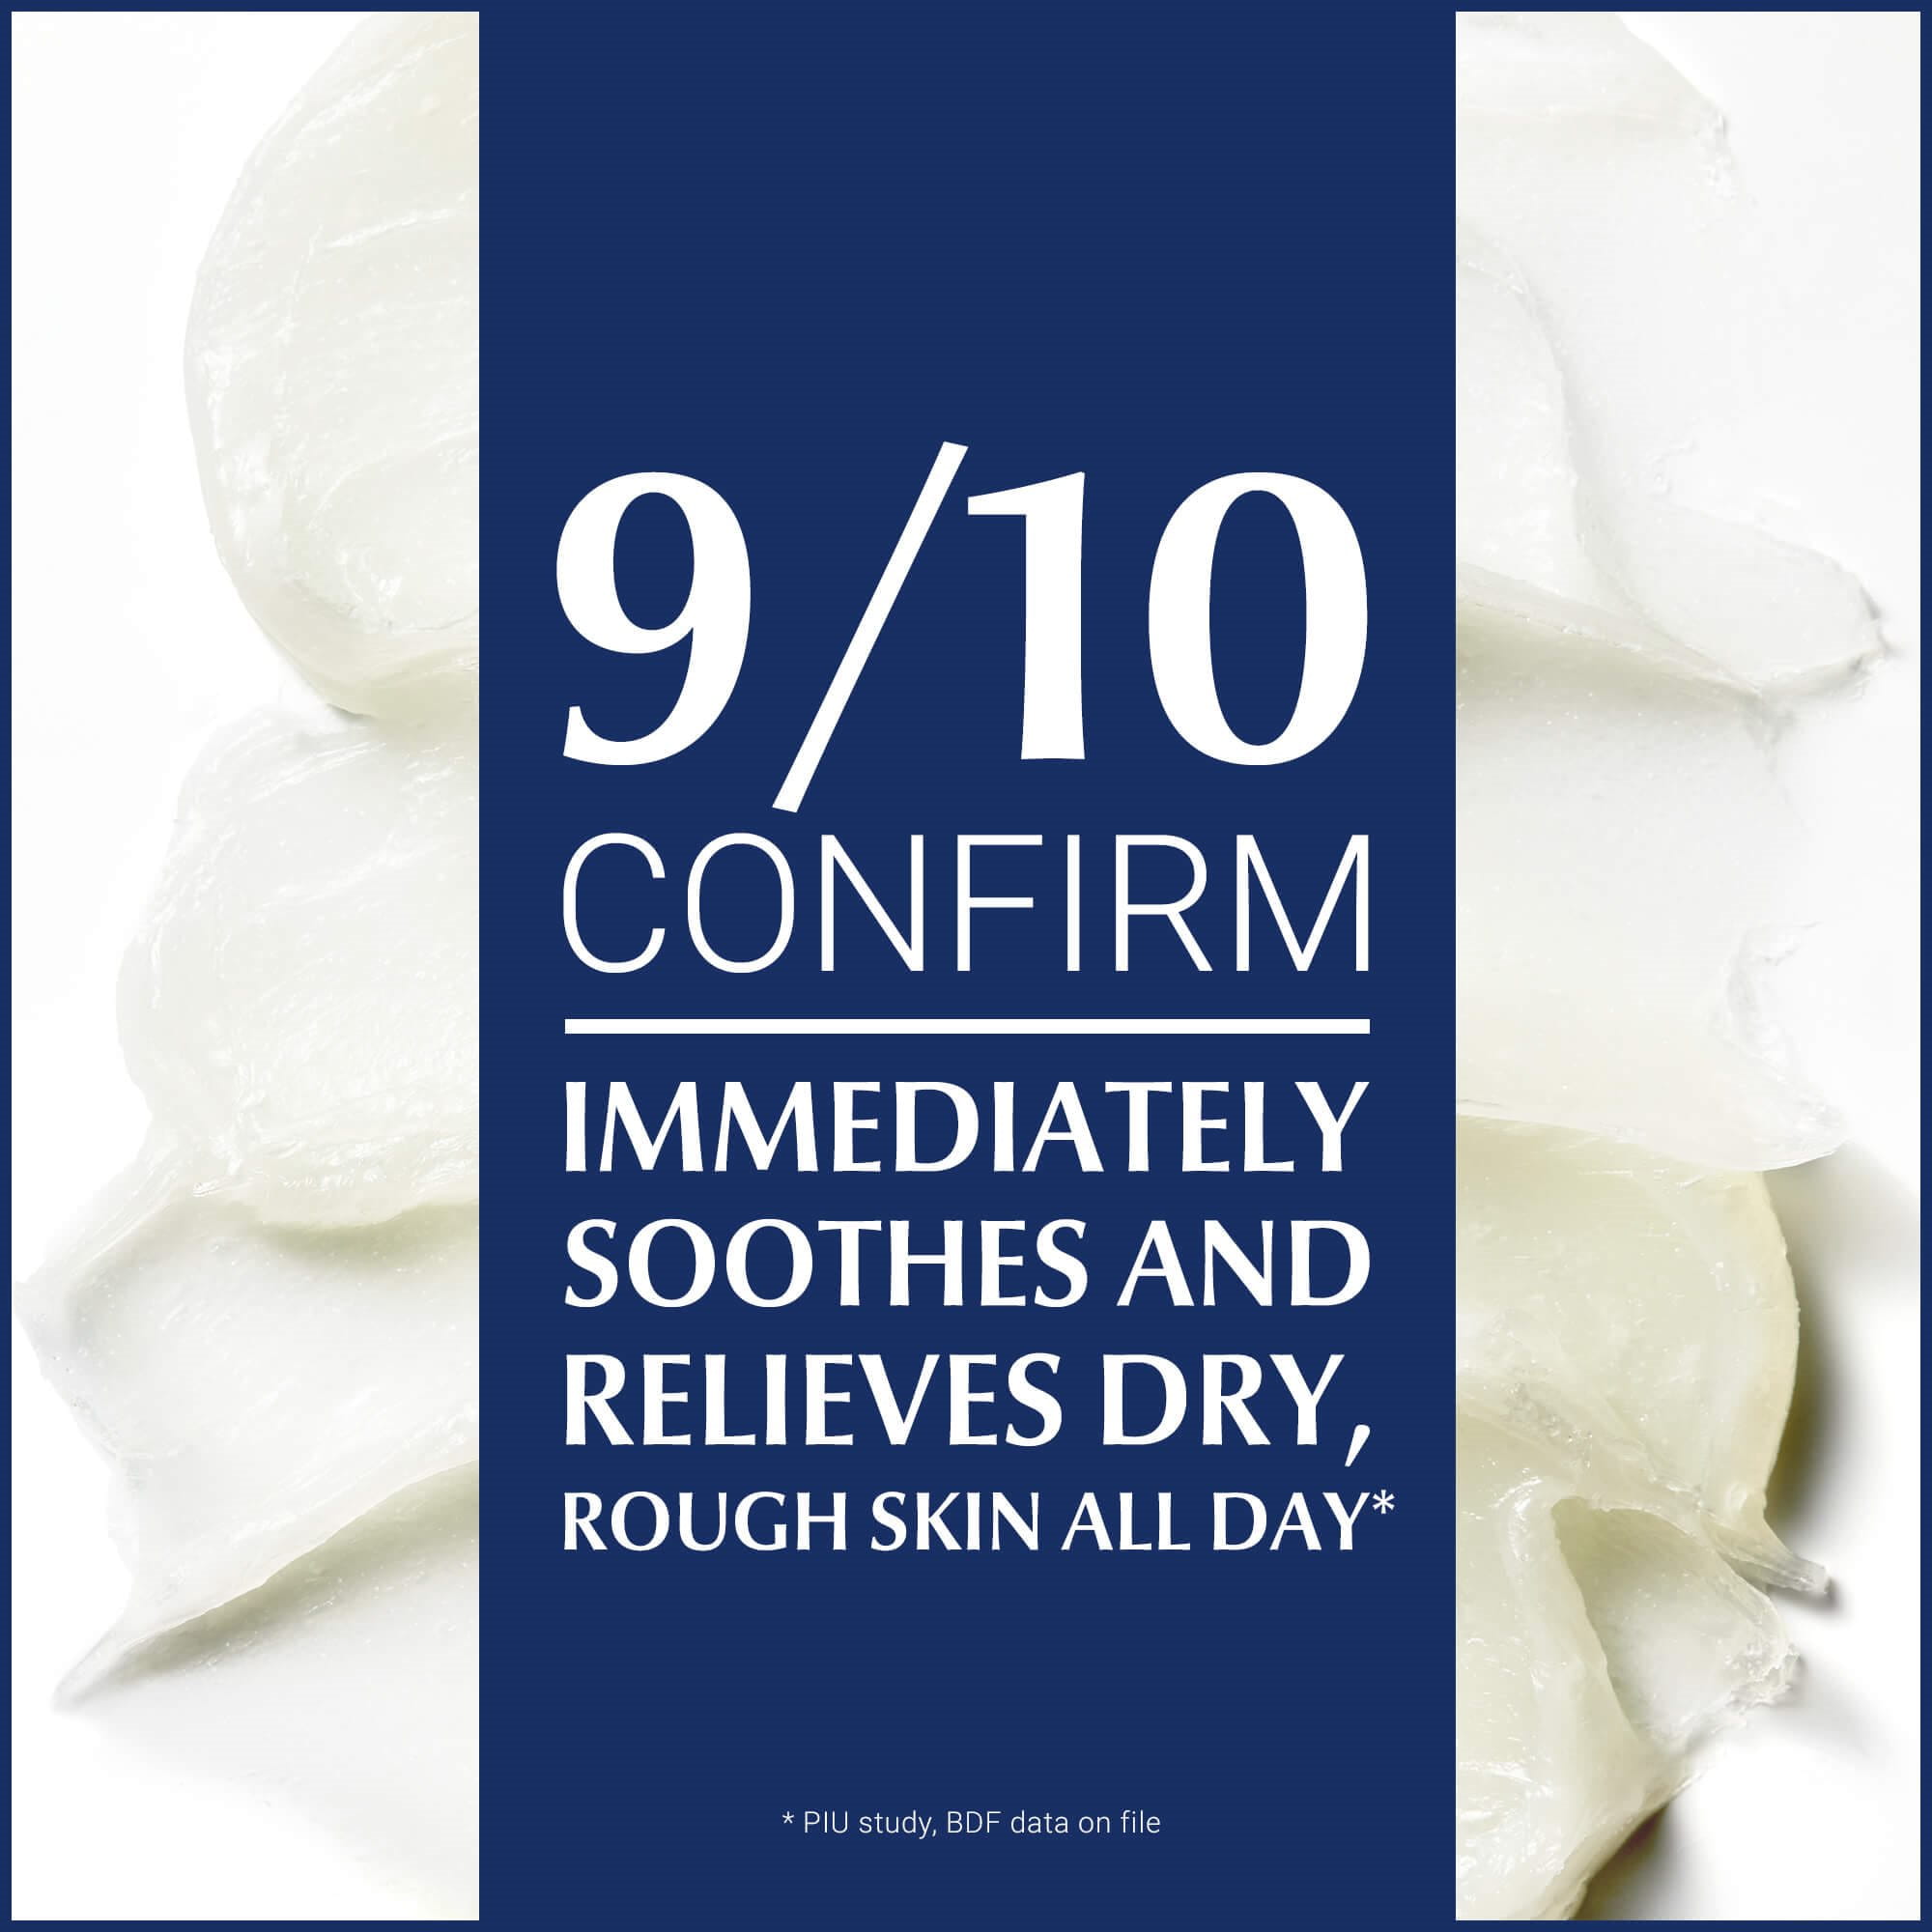 Image that reads “9/10 confirm (that Eucerin) immediately soothes and relieves dry, rough skin all day”